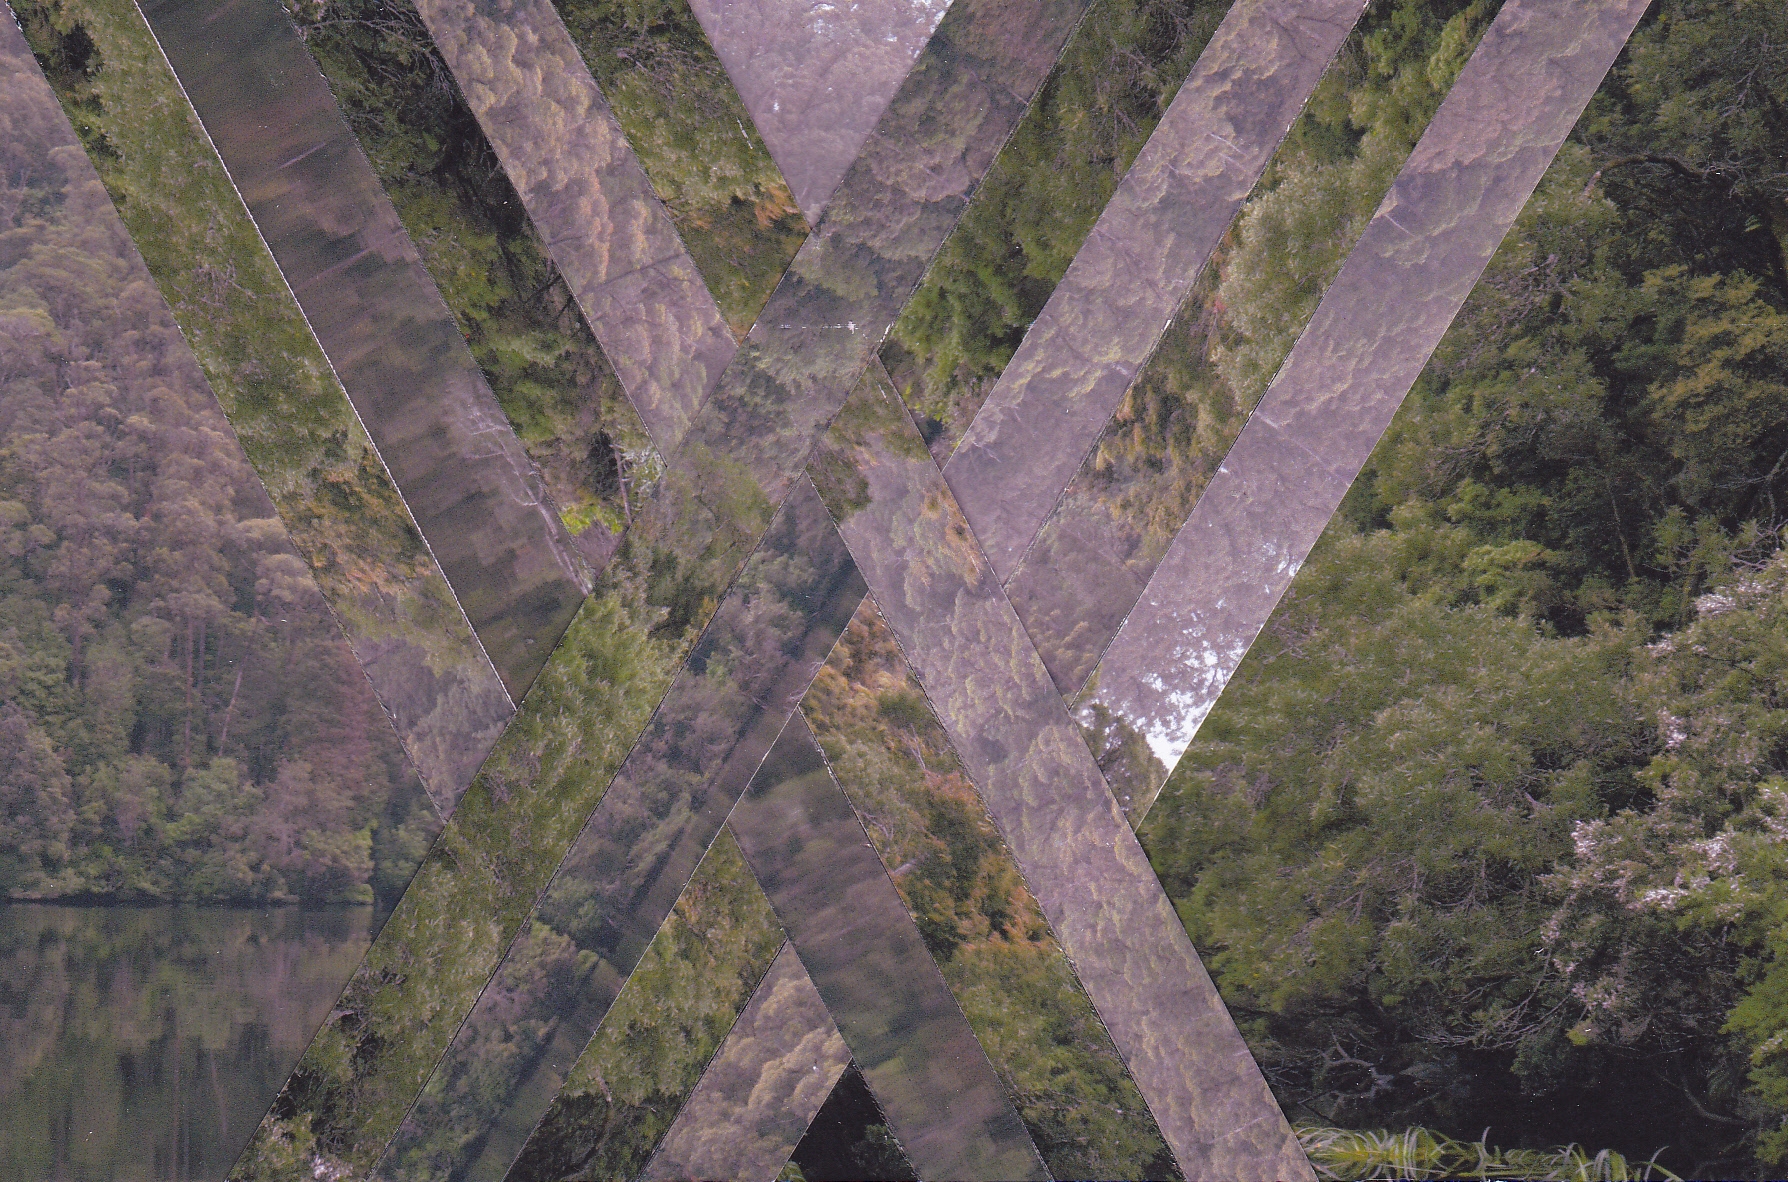 collage of interwoven lines cut from a photograph of a forest